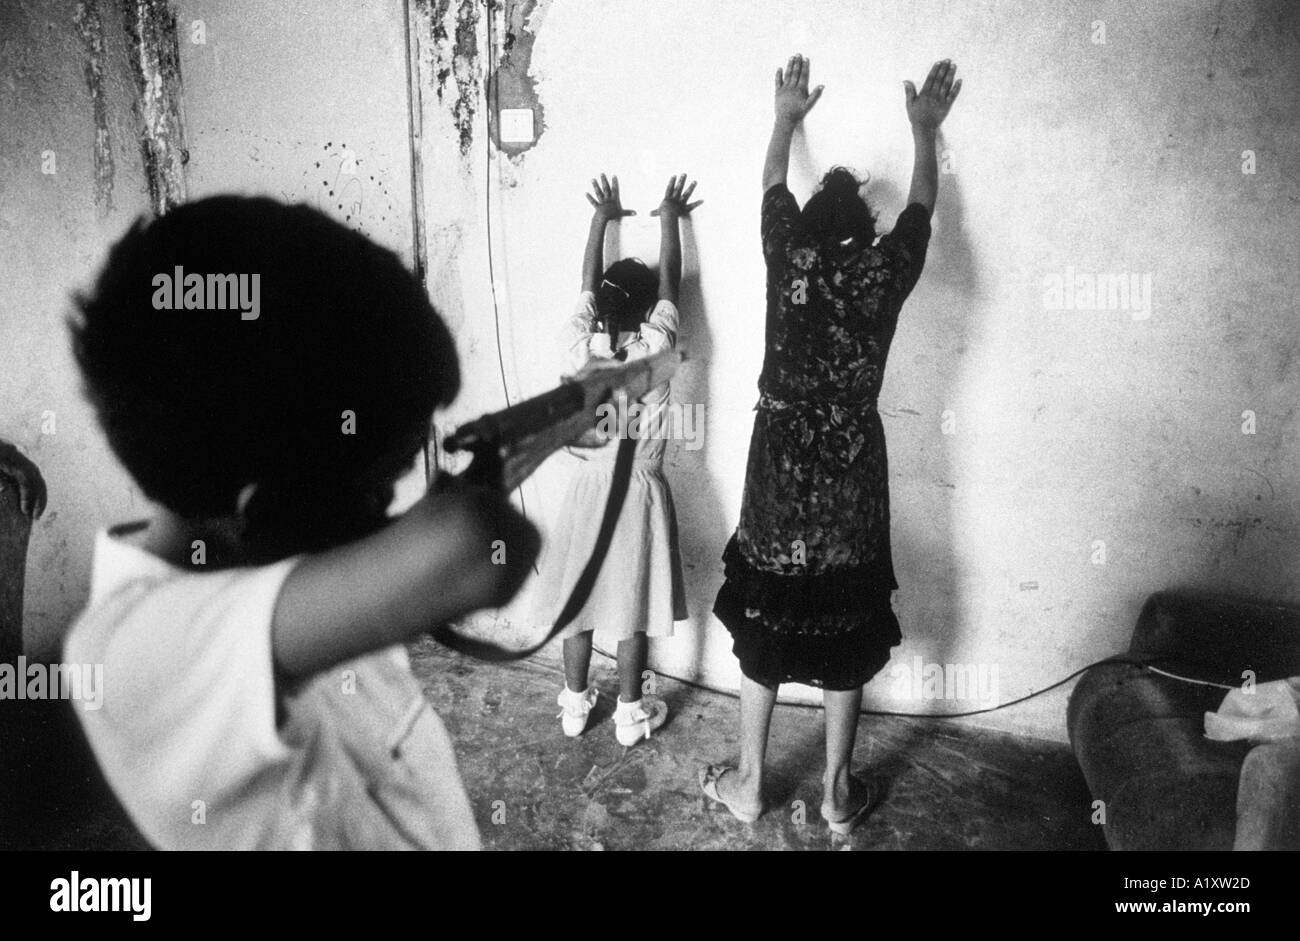 PALESTINIAN COLLABORATORS CHILDREN PLAYING WAR FAHME WEST BANK 1992 Stock Photo